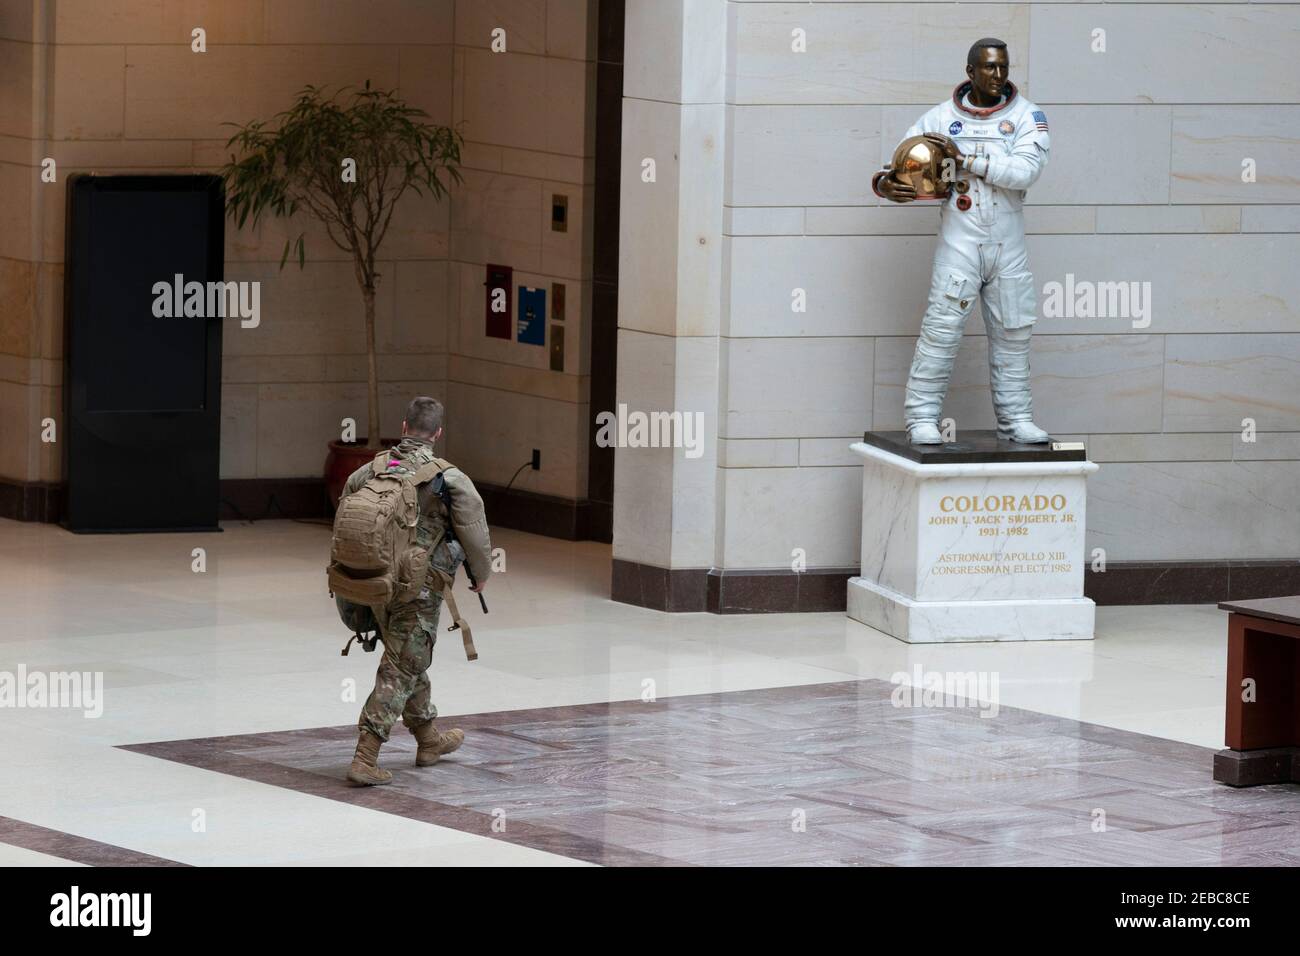 Washington, United States Of America. 12th Feb, 2021. A member of the National Guard walks near the statue of Apollo 13 astronaut Jack Swigert, who was also elected to Congress from Colorado but never served, in the Capitol Hill Visitors Center in Washington, DC, February 12, 2021.Credit: Chris Kleponis - Pool via CNP | usage worldwide Credit: dpa/Alamy Live News Stock Photo